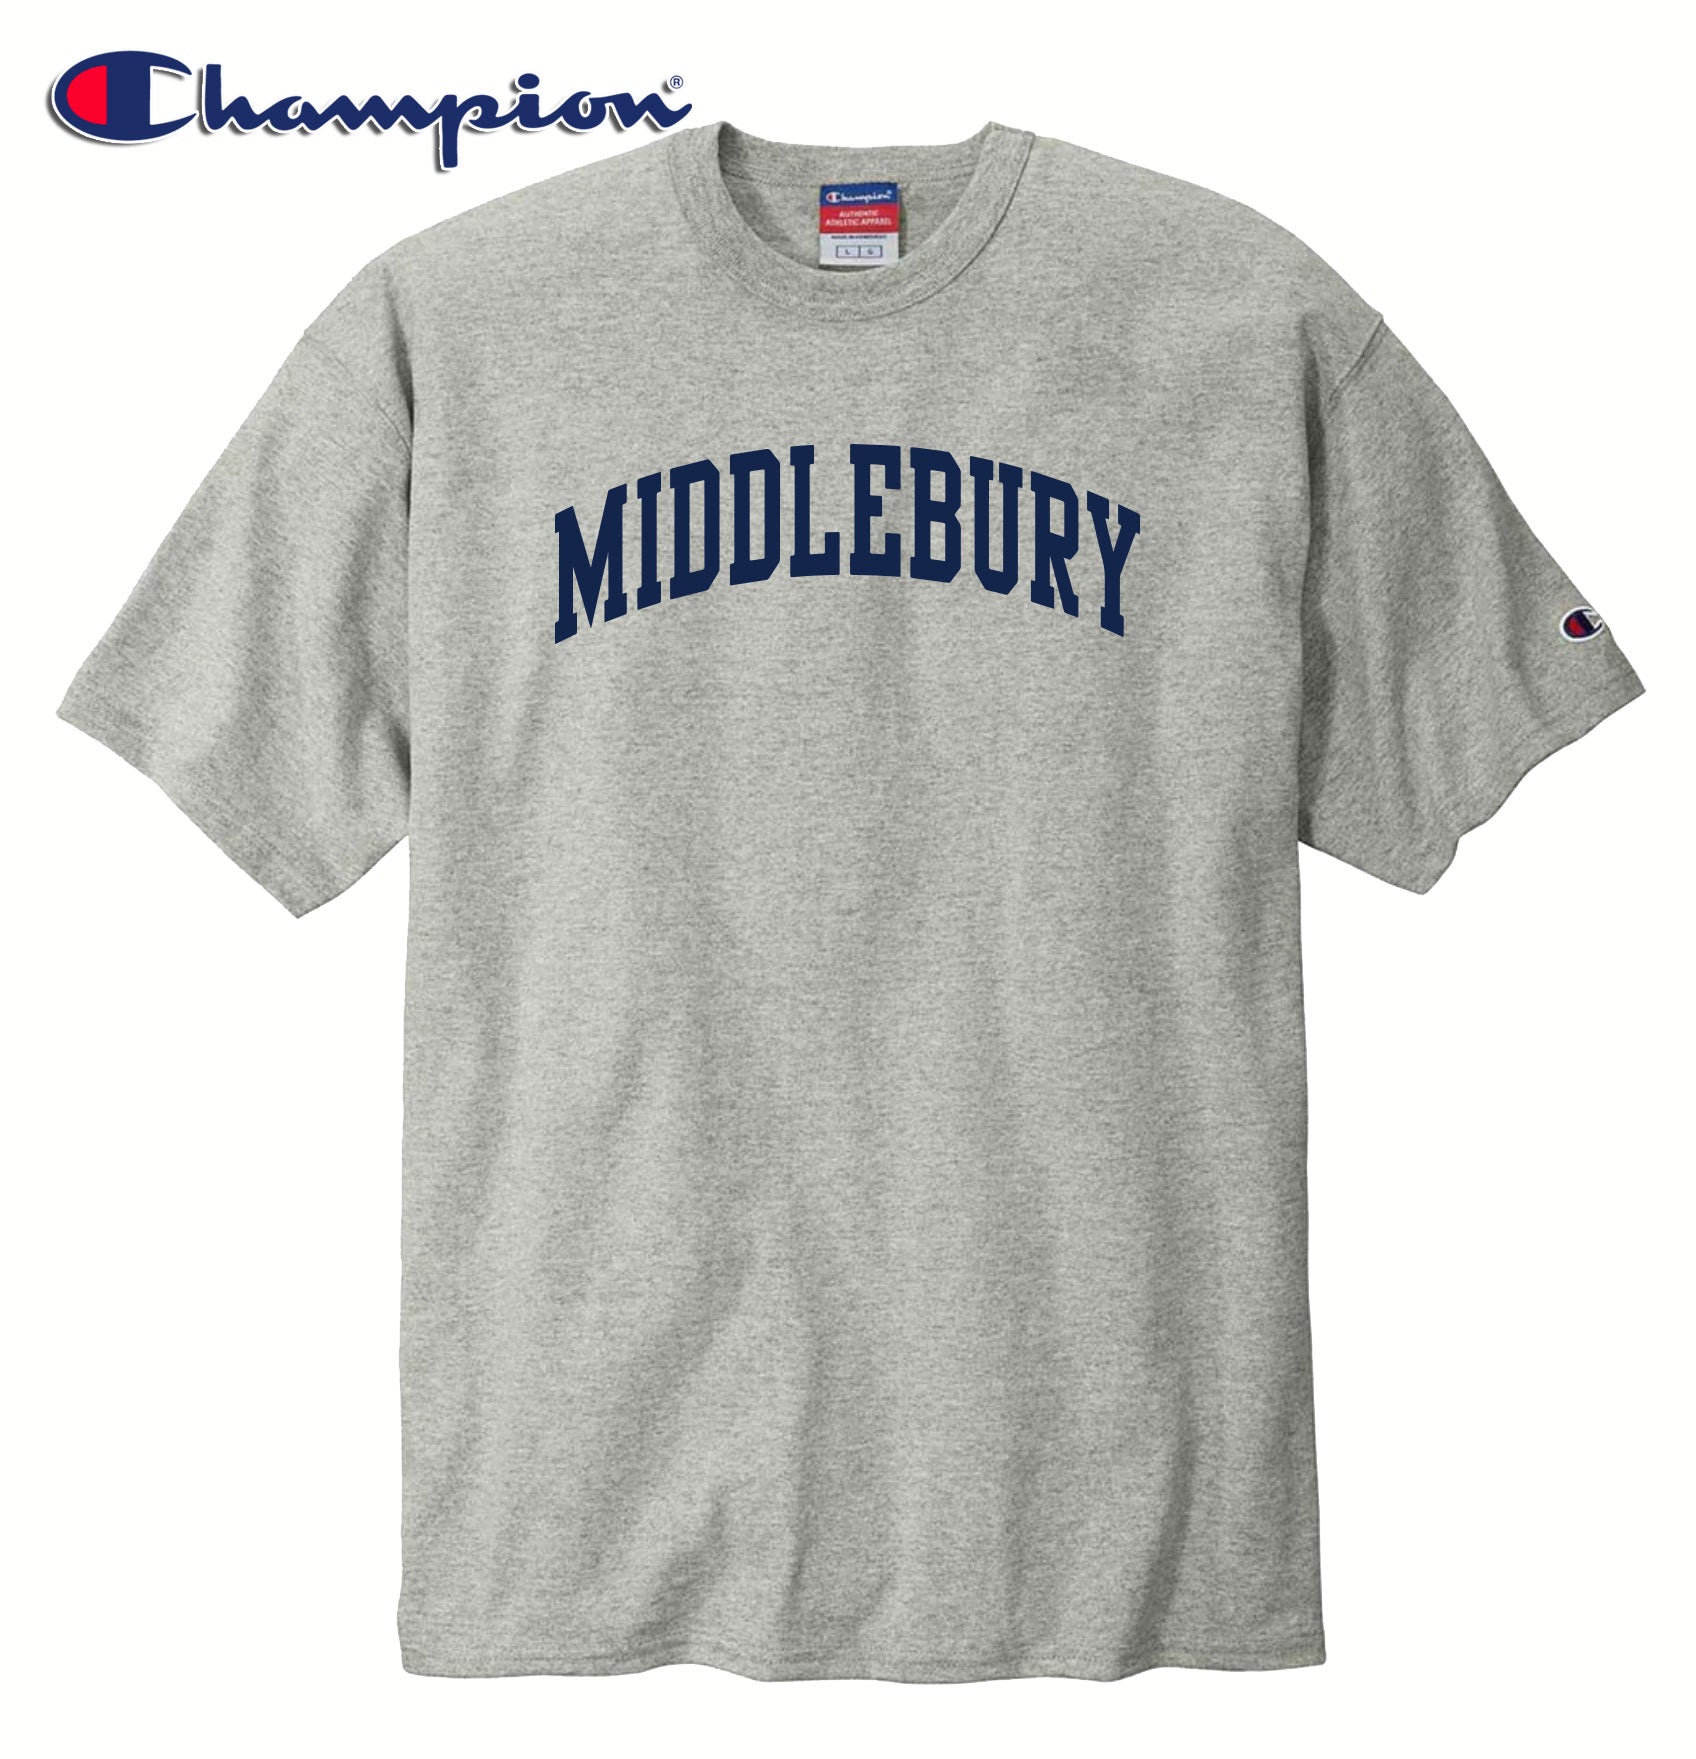 Middlebury Youth Jersey Short Sleeve Tee (Oxford Grey)